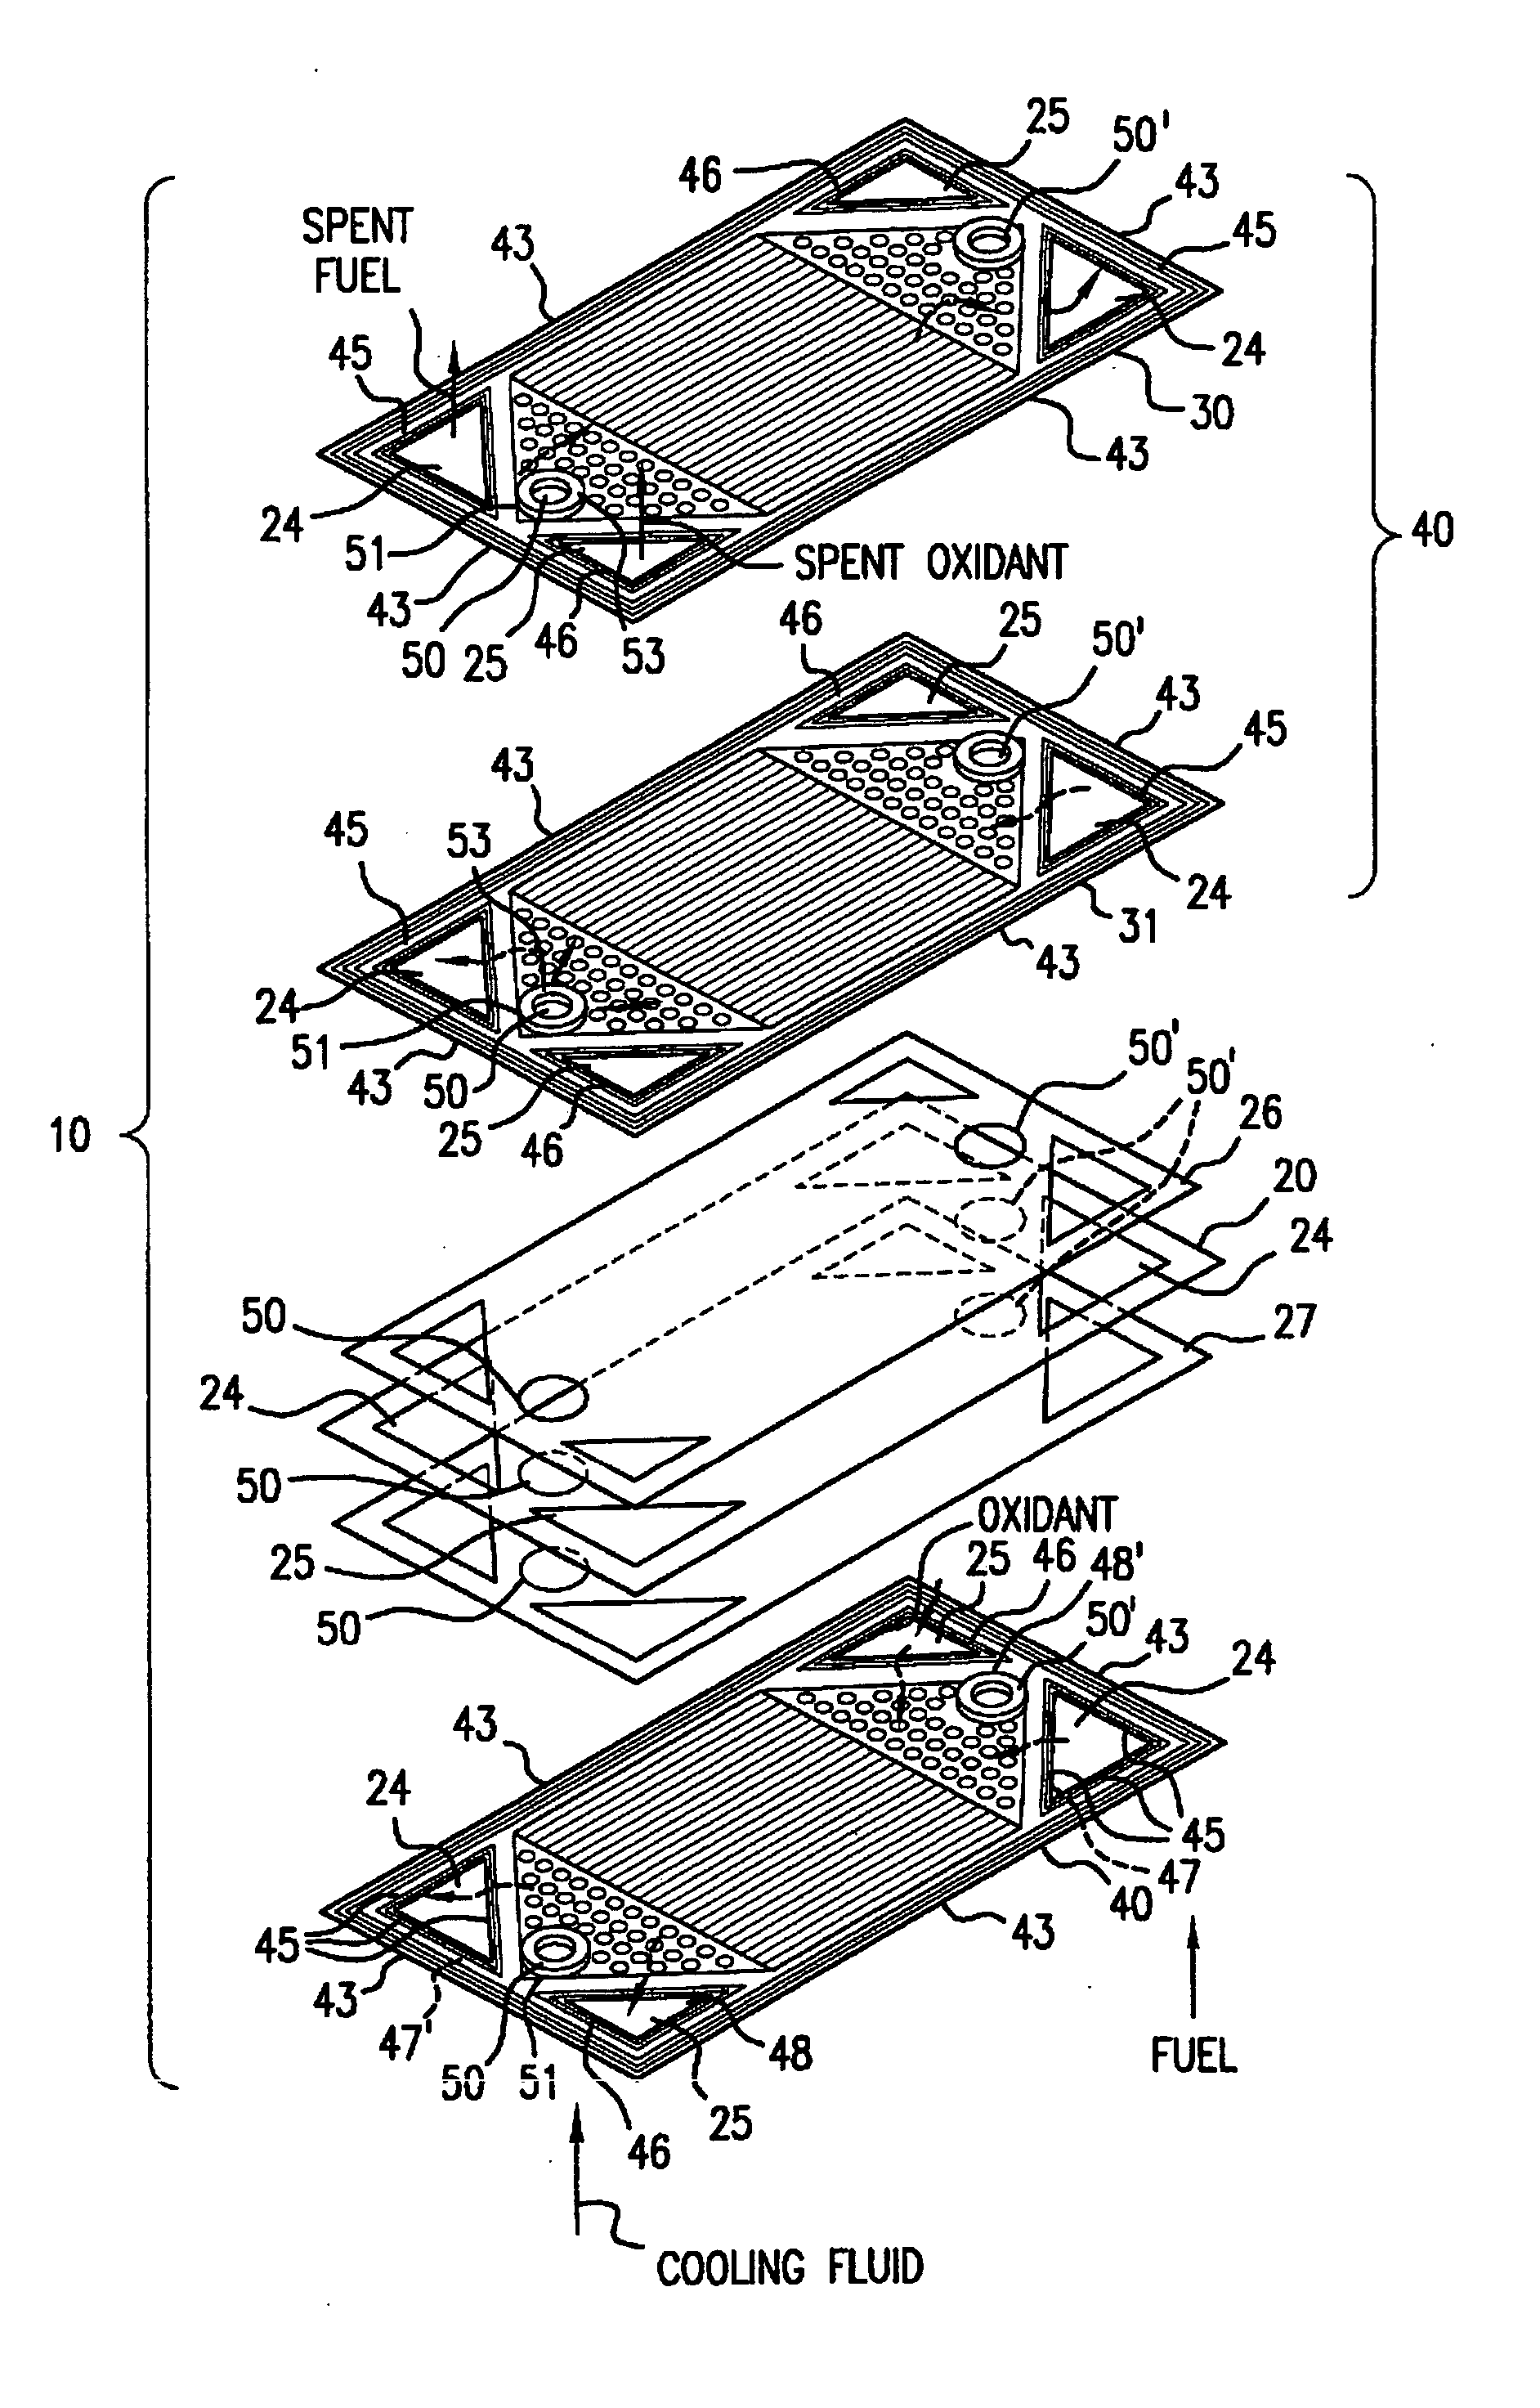 Fuel cell bipolar separator plate